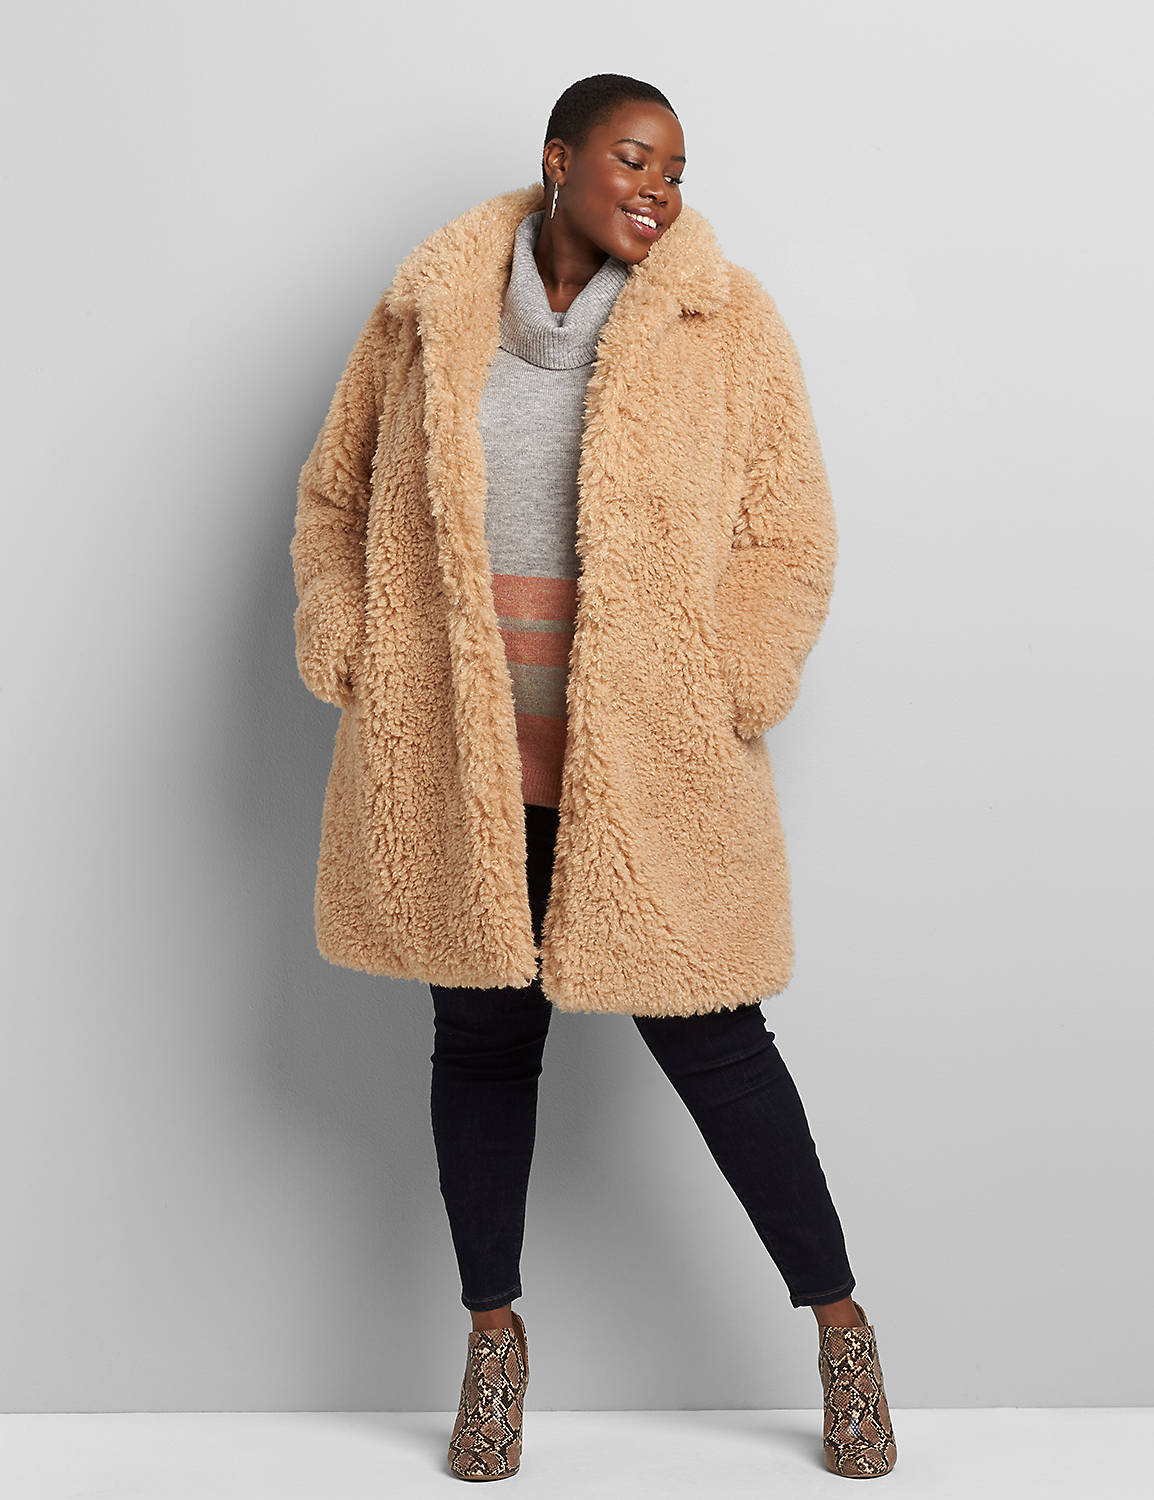 High Pile Teddy Coat 1116307:Camel as Sampled:14/16 Product Image 3